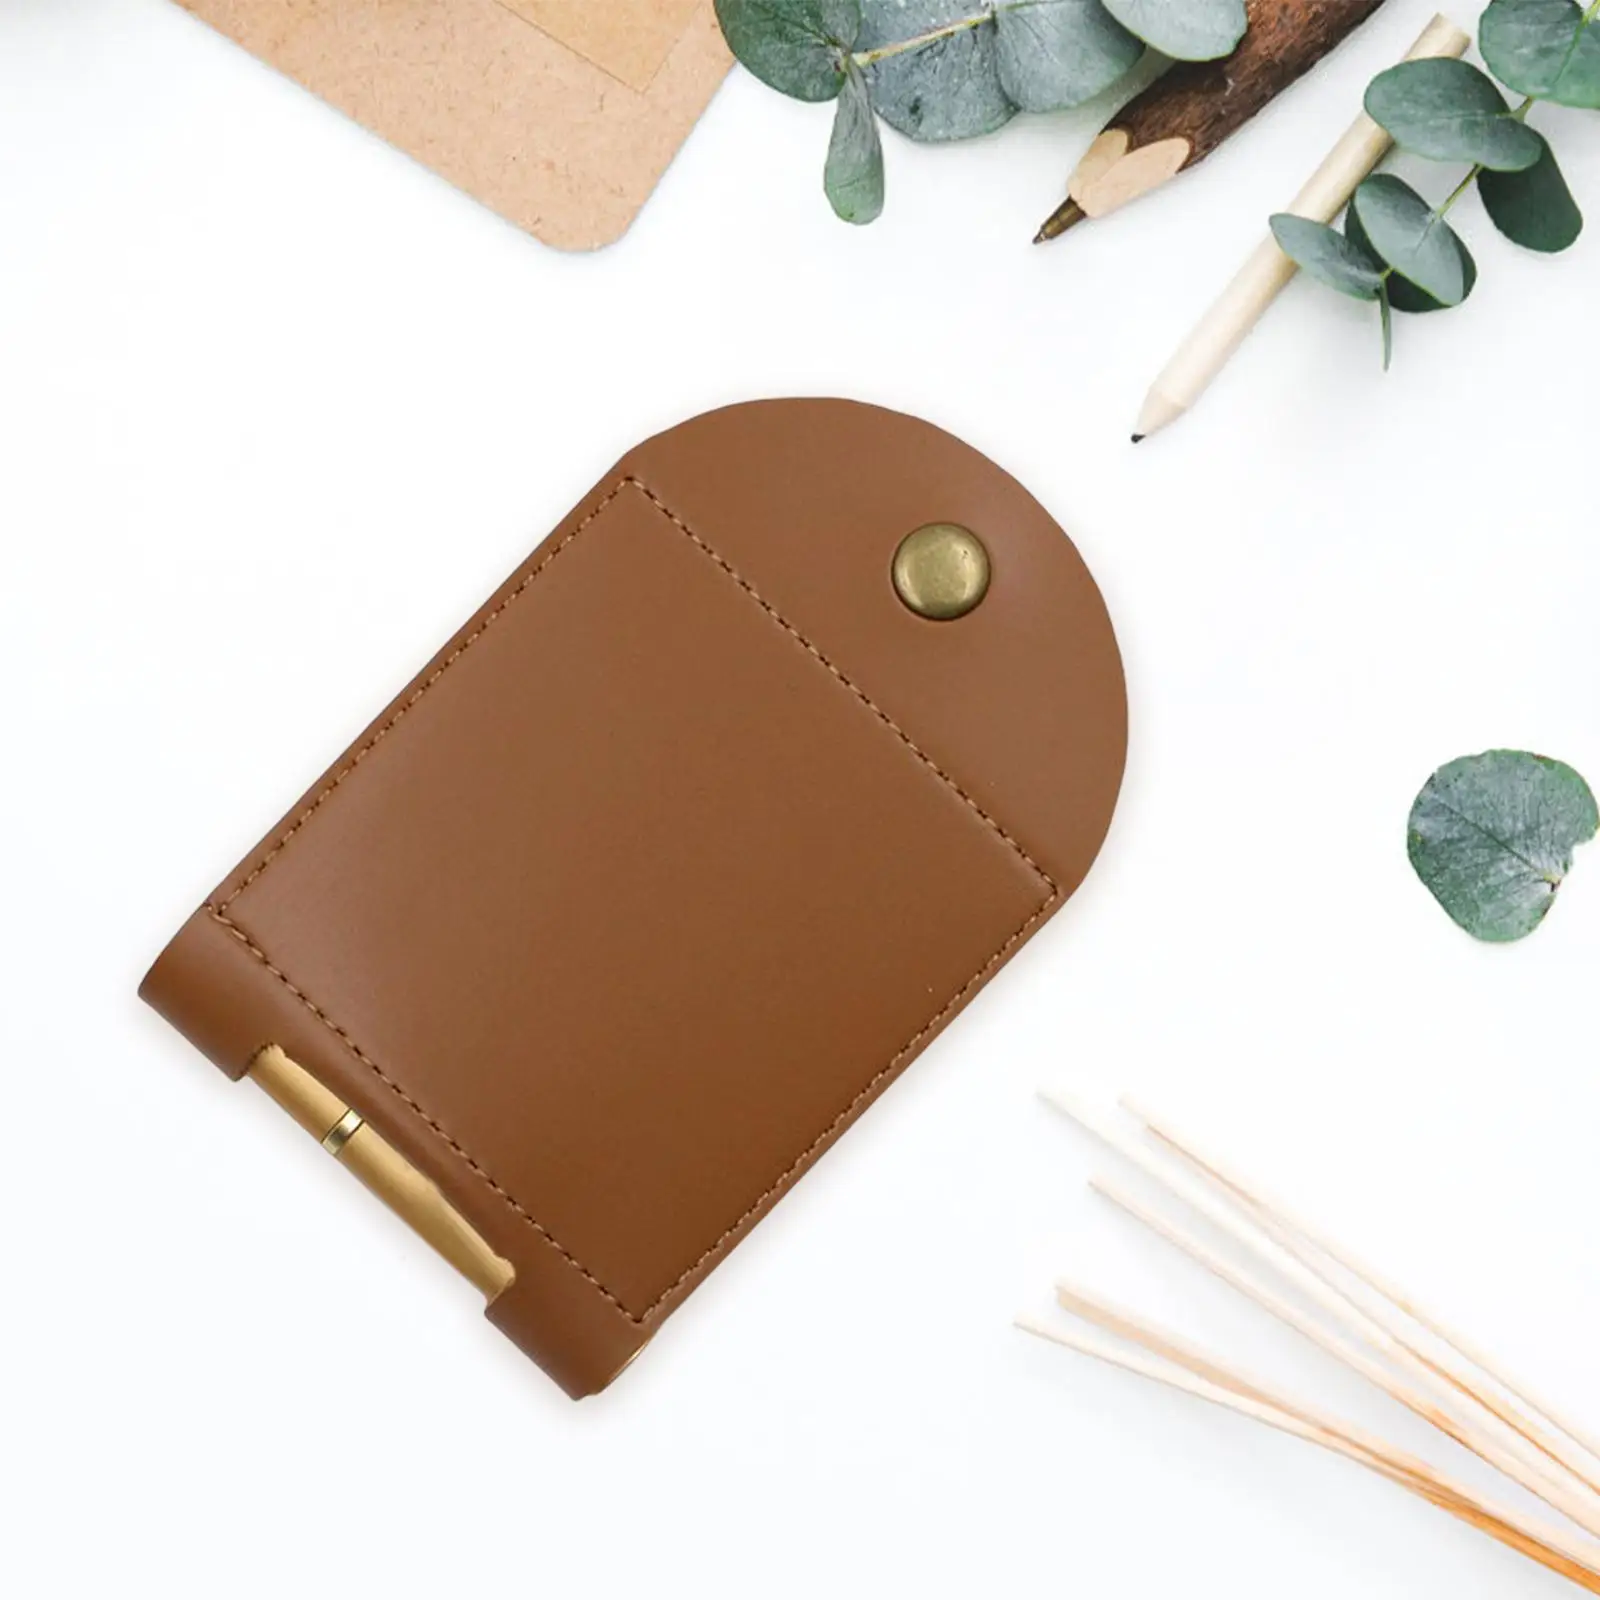 PU Leather Playing Card Box Protector Pouch Accessories Fits and Bridge Size Cards with Snap Closure Handmade Comfortable